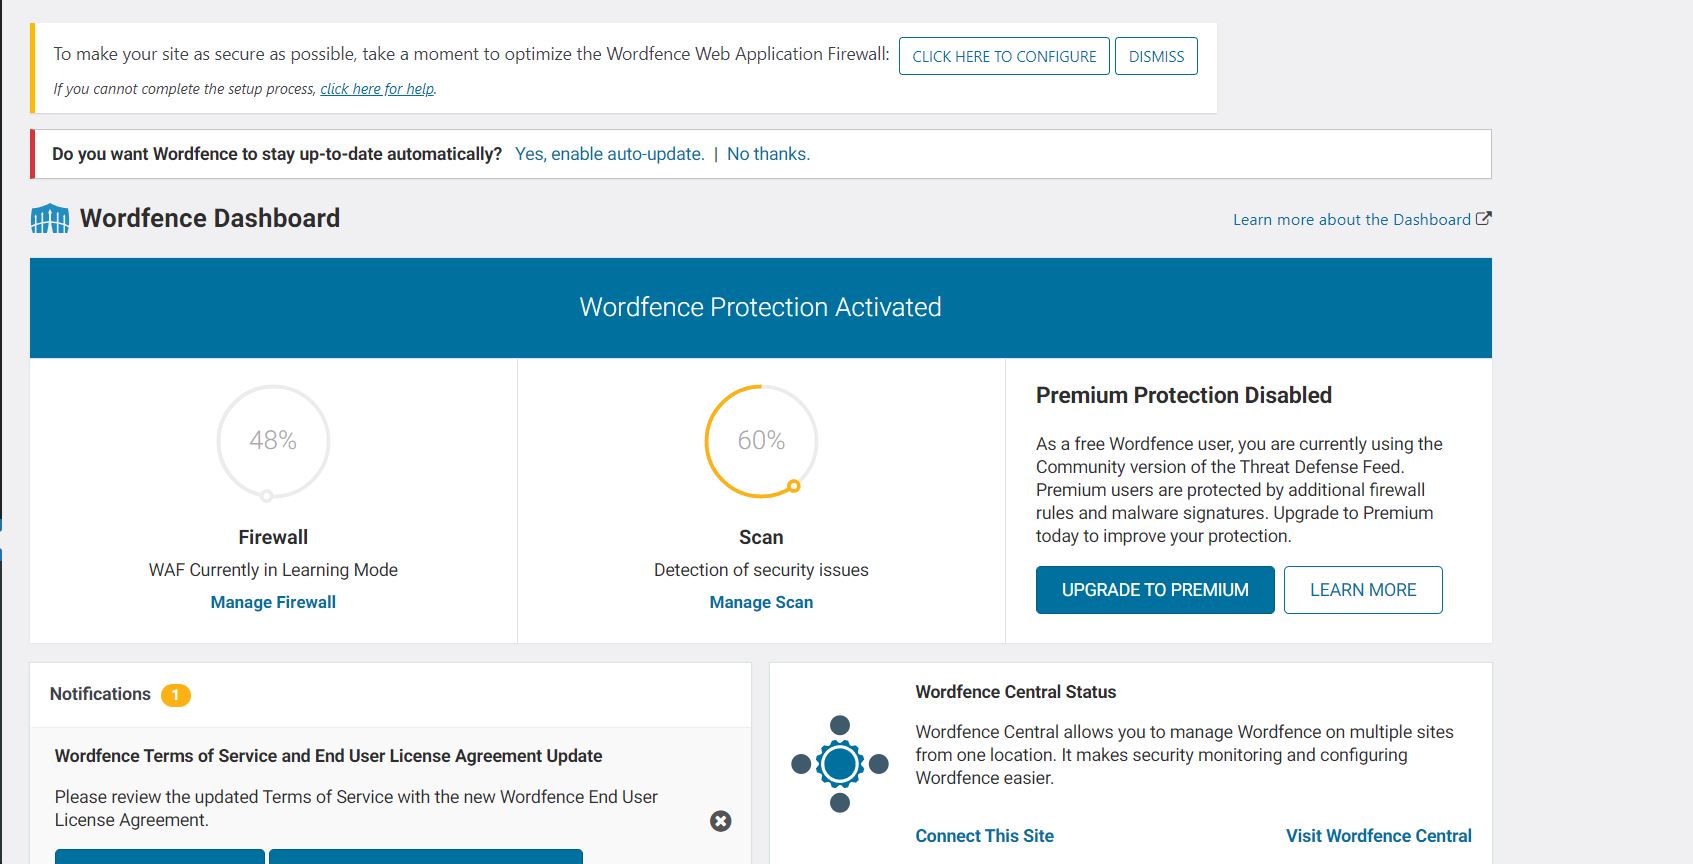 How To Install Wordfence Guide - Configuring Step 3 - Wordfence Dashboard